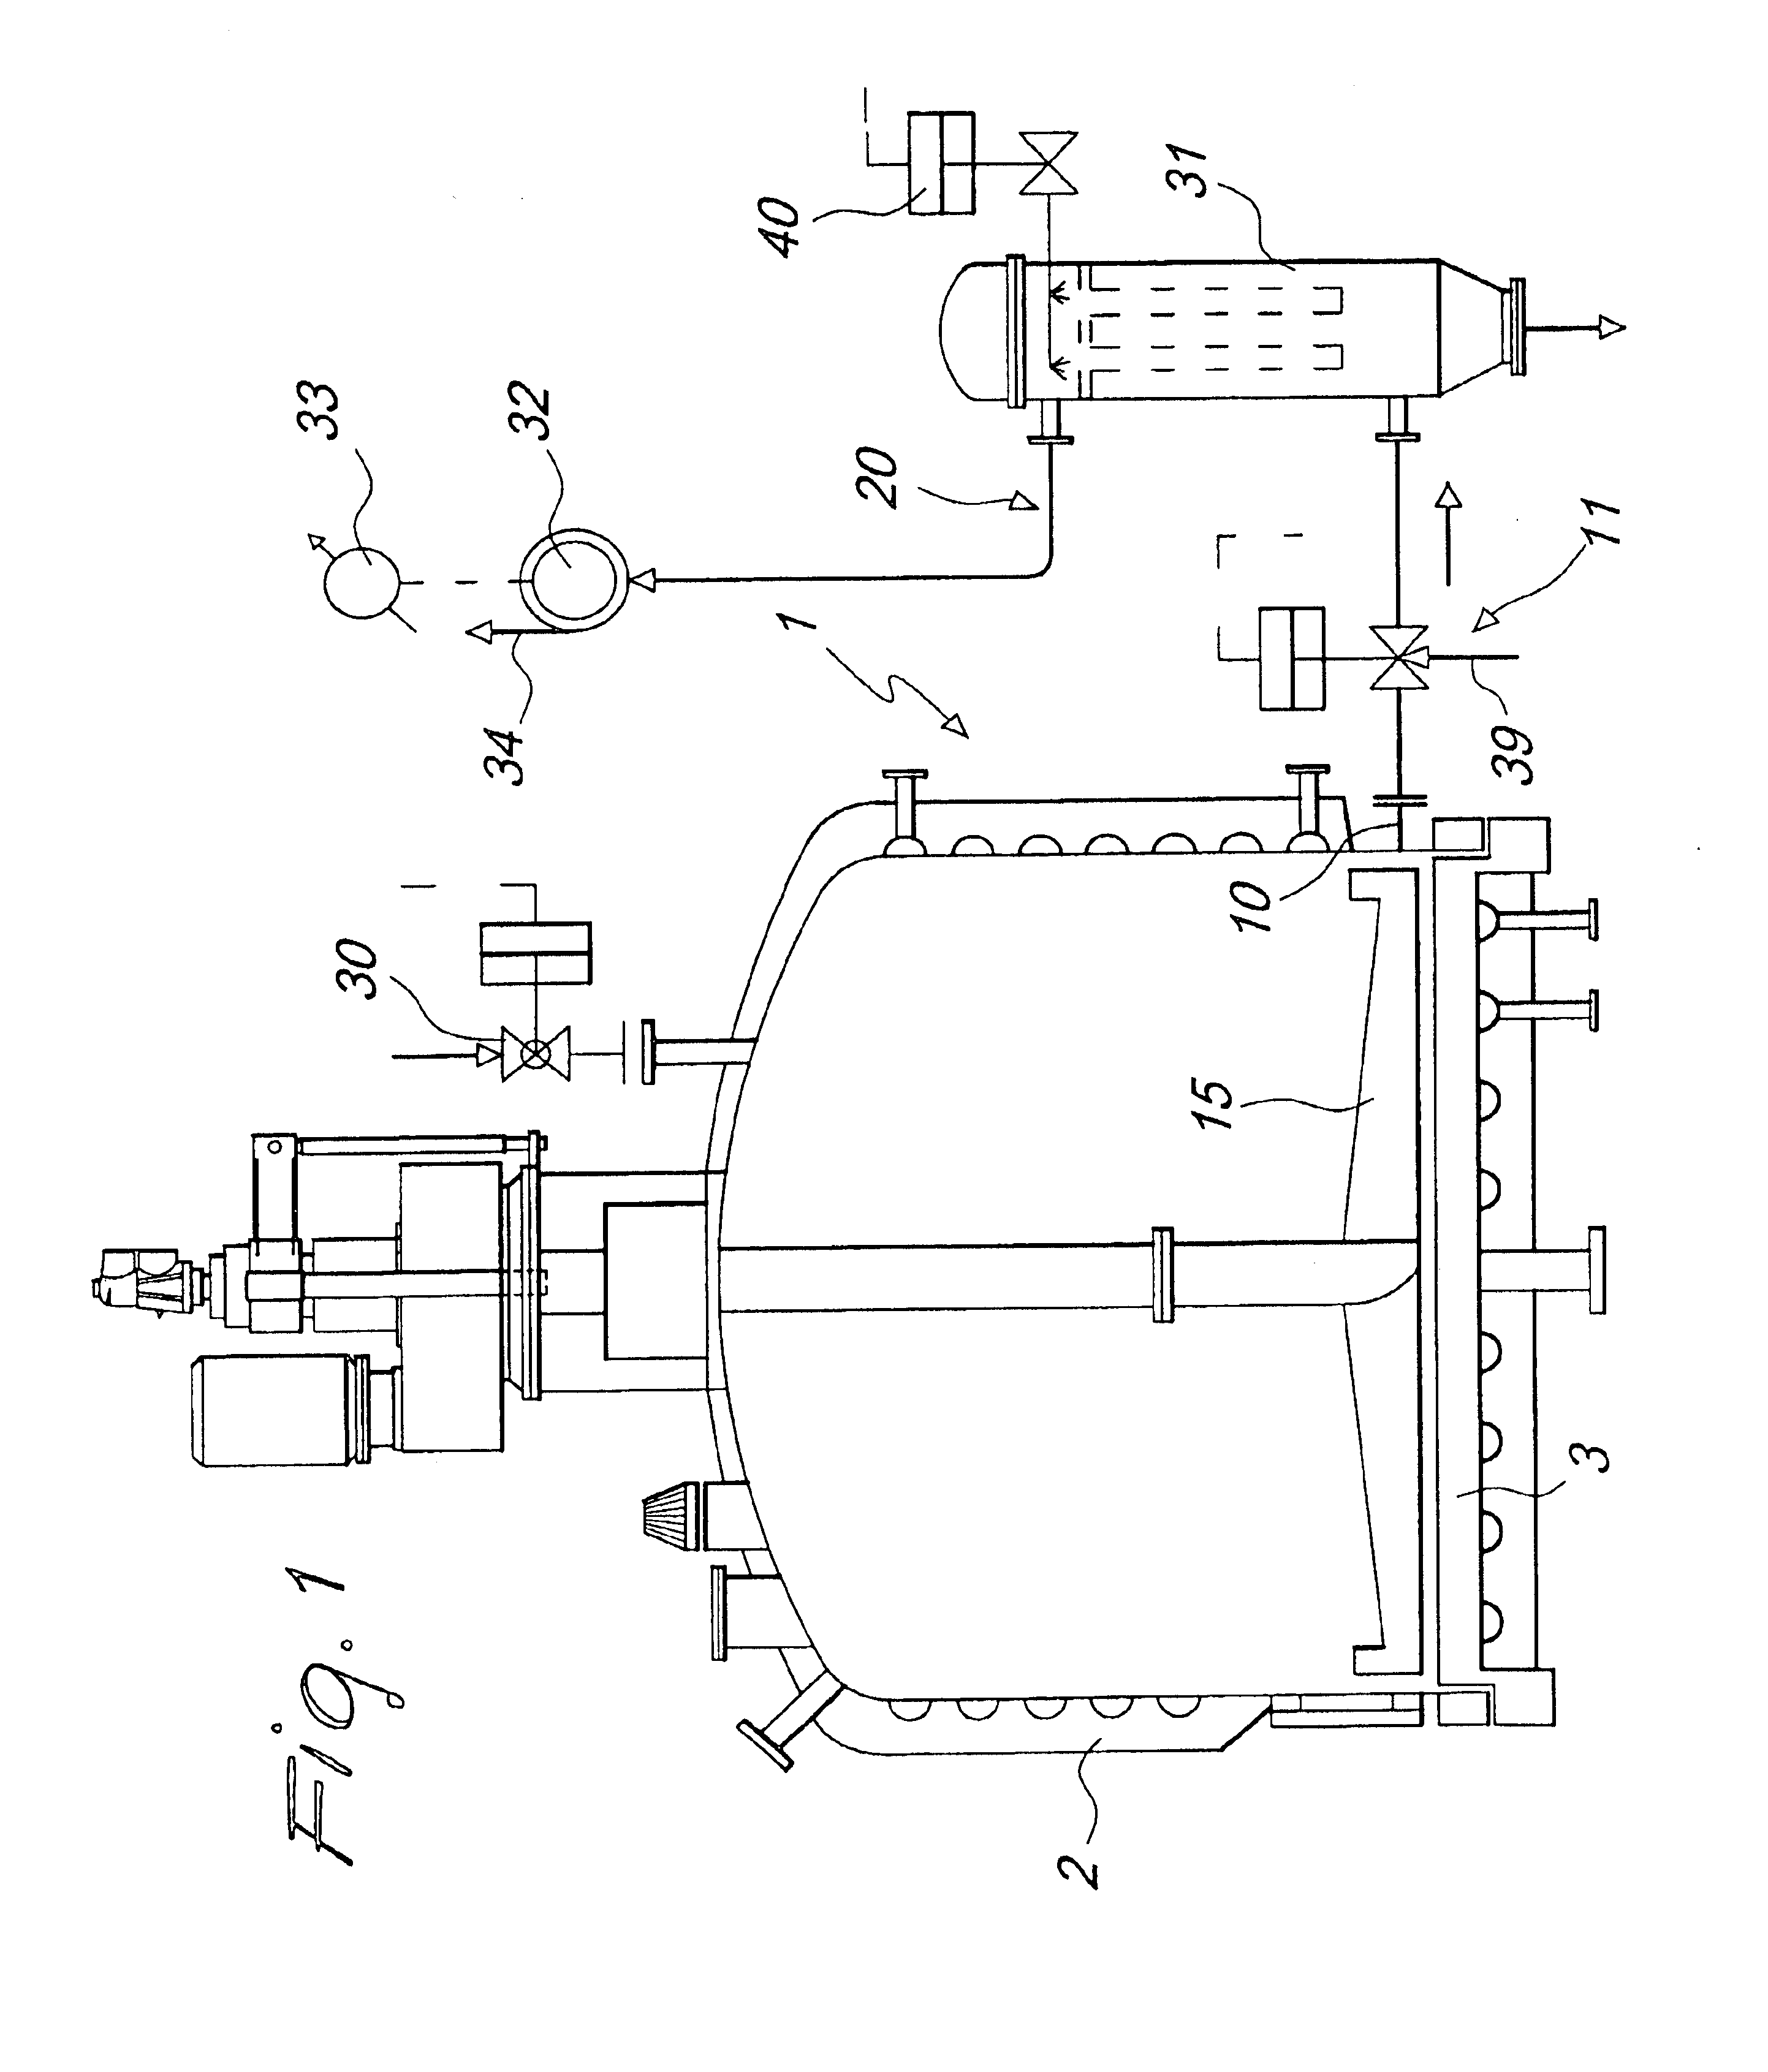 Dried product discharge system